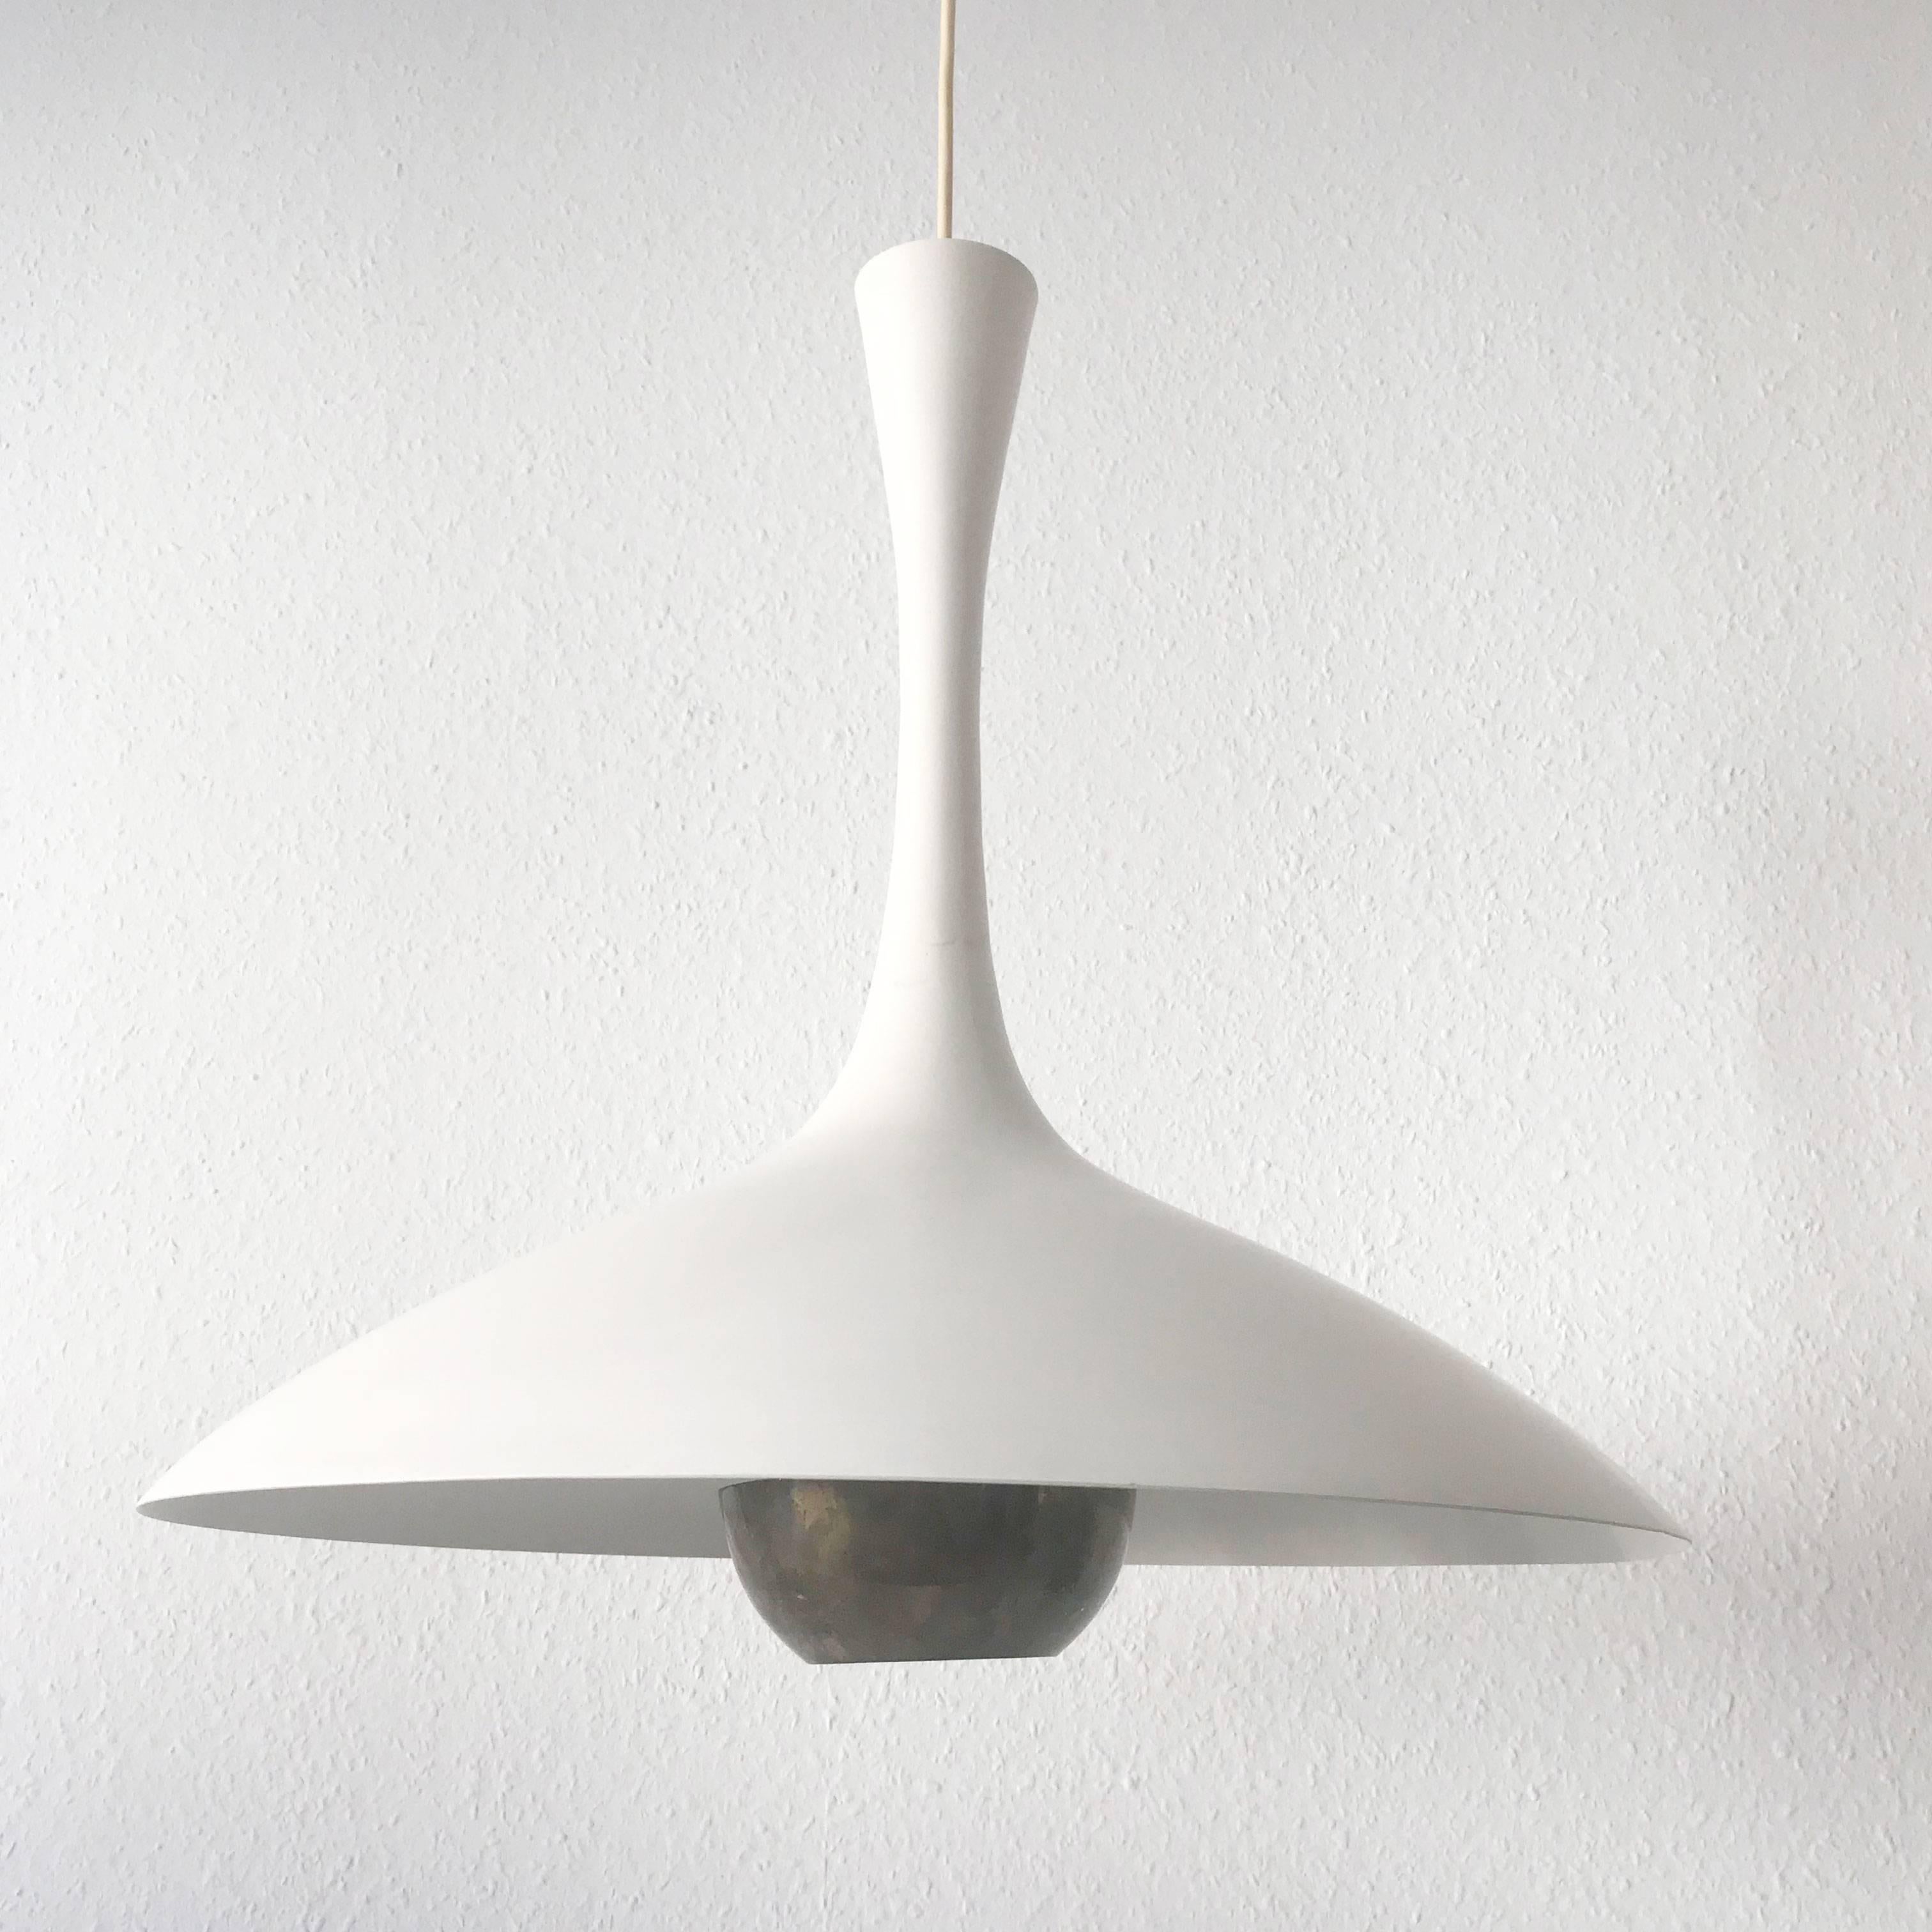 Mid-Century Modern Elegant Mid Century Modern Pendant Lamp or Hanging Light by Florian Schulz 1960s For Sale